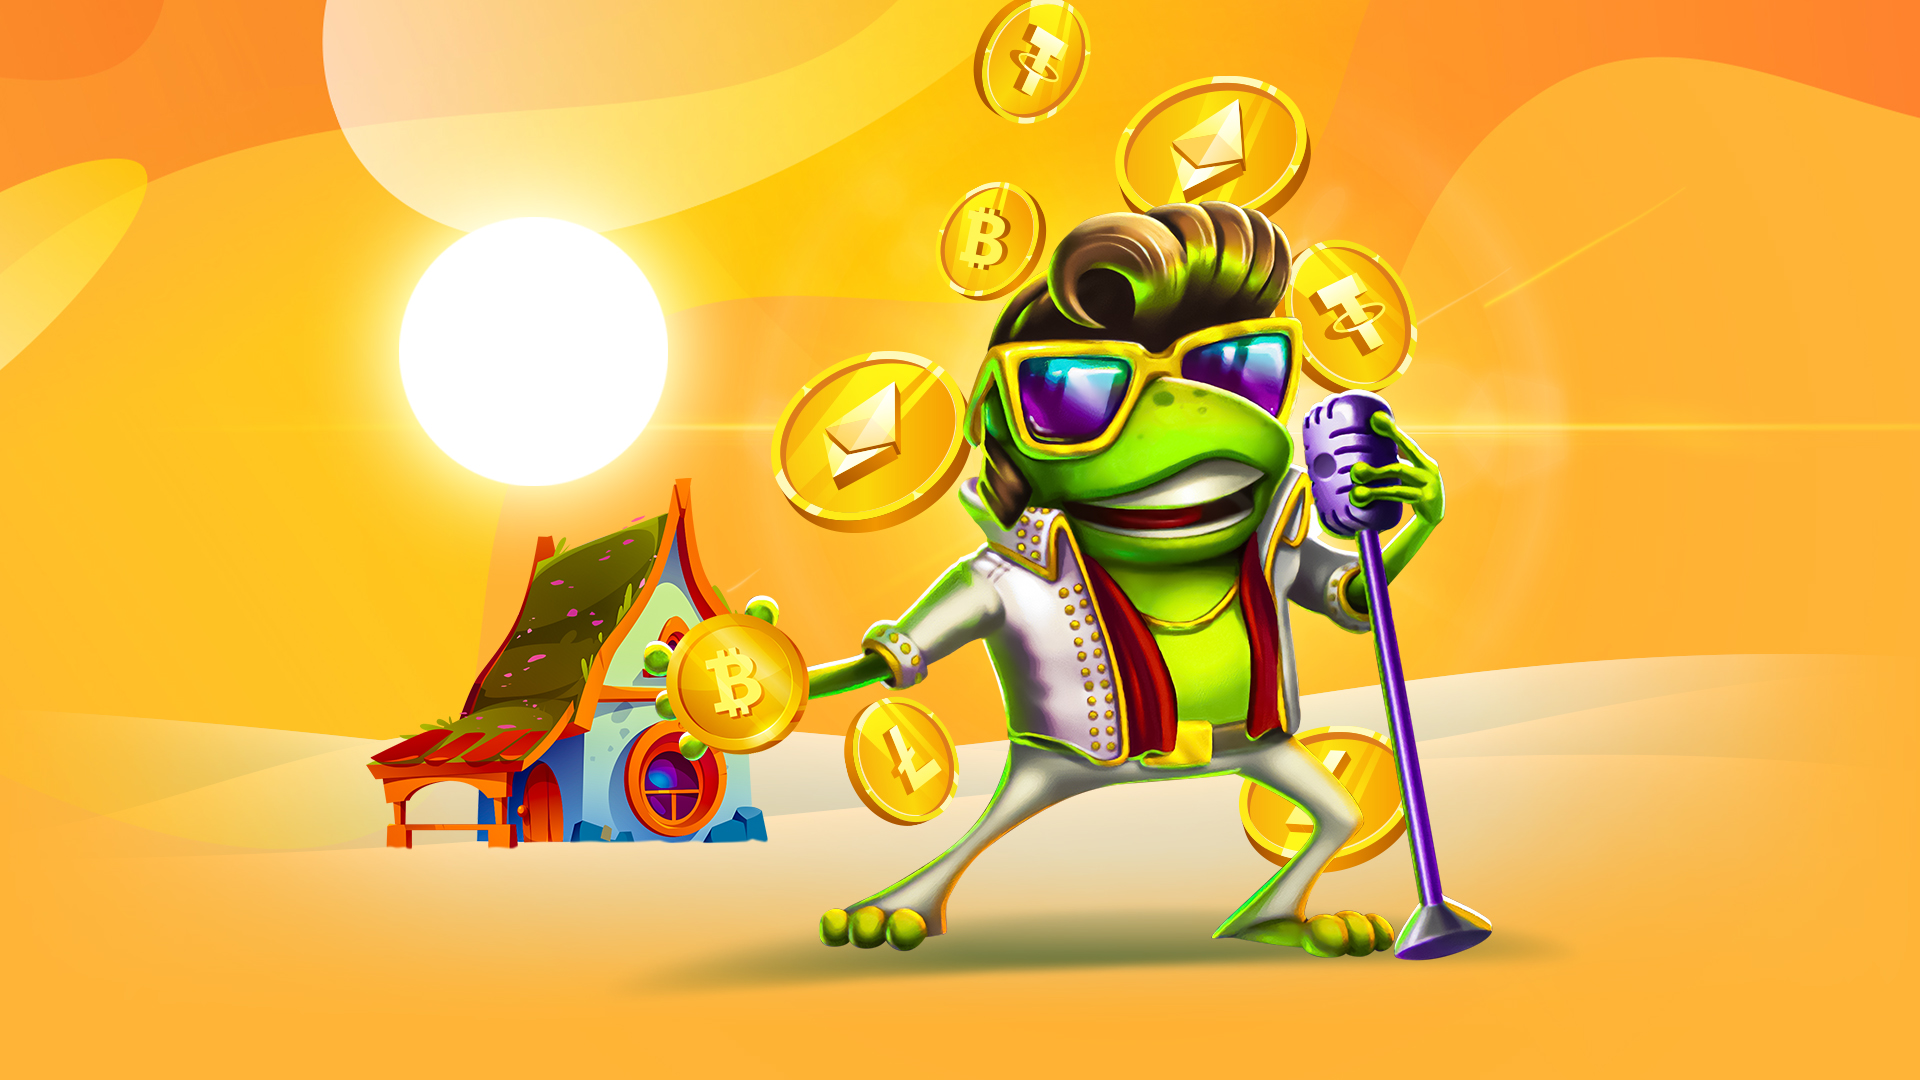 A cartoon frog in an Elvis costume with assorted Bitcoins, Litecoins, Ethereum and other crypto coins, set against an orange background.